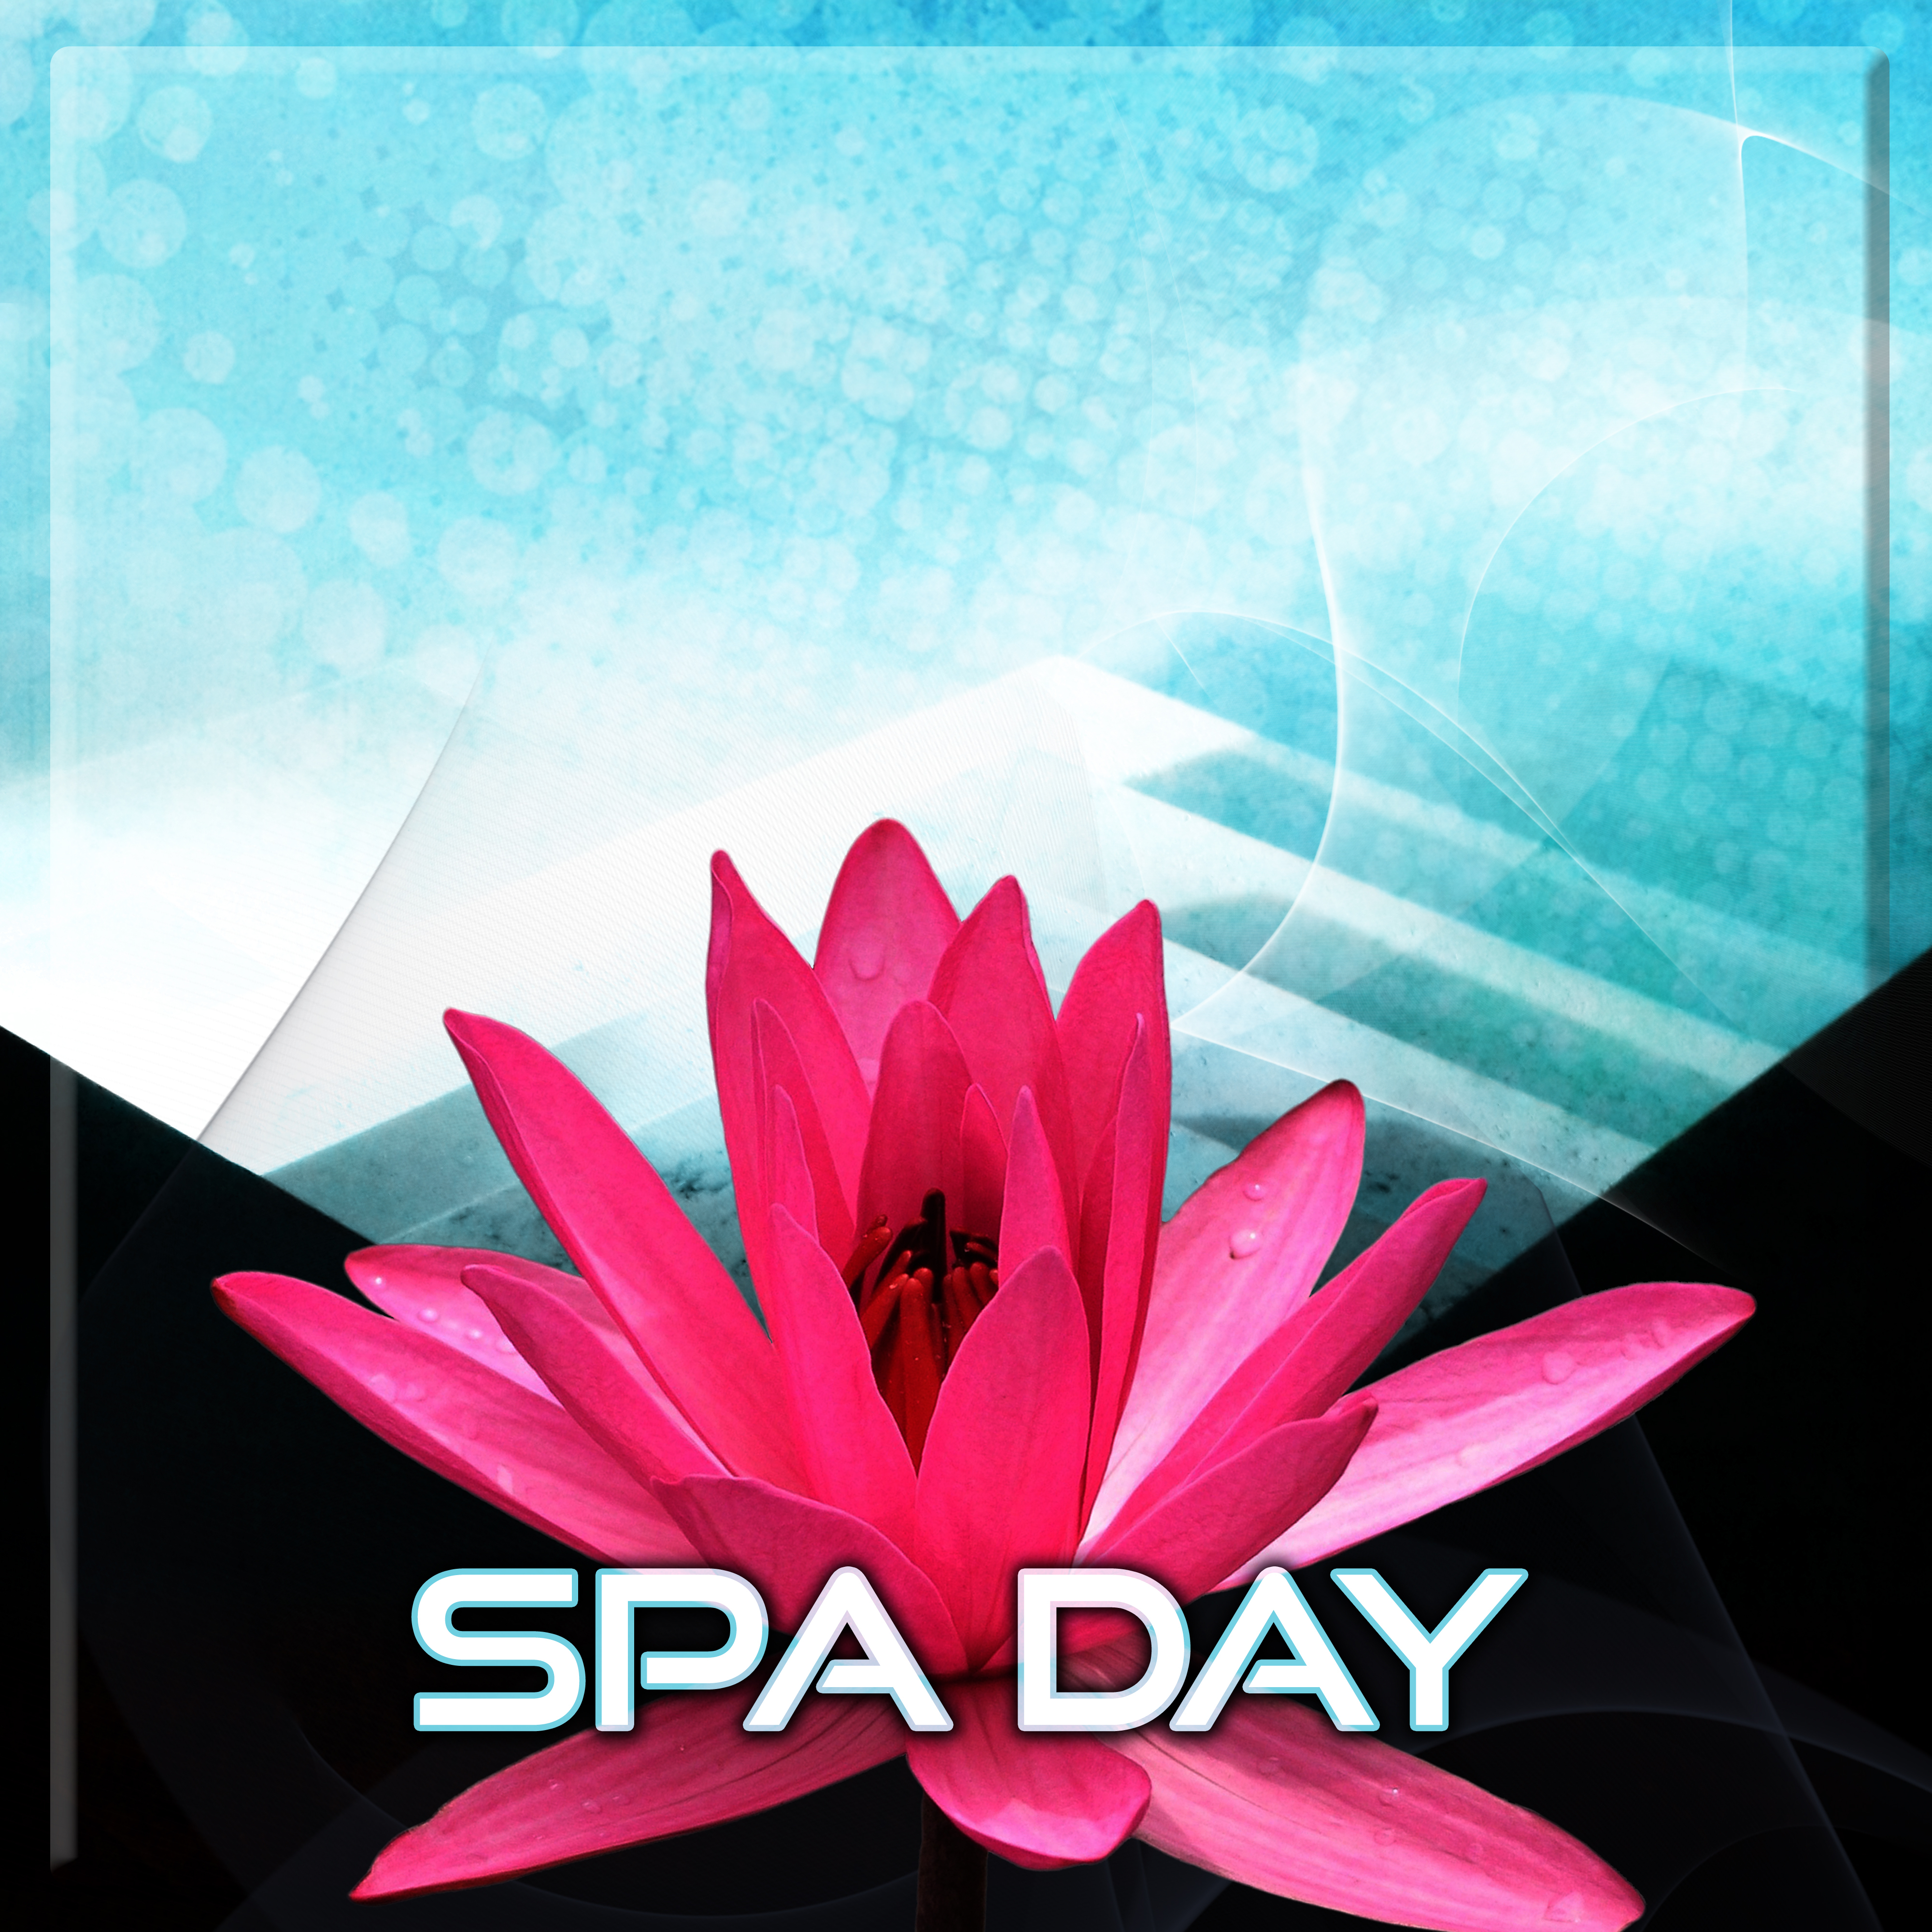 Spa Day  The Most Relaxing Spa Music for Massage  Reflexology, Shiatsu  Reiki Healing, Bath Spa with Nature Sounds, Lazy Day at Wellness Spa with Water Sounds, Aromatherapy to Destress